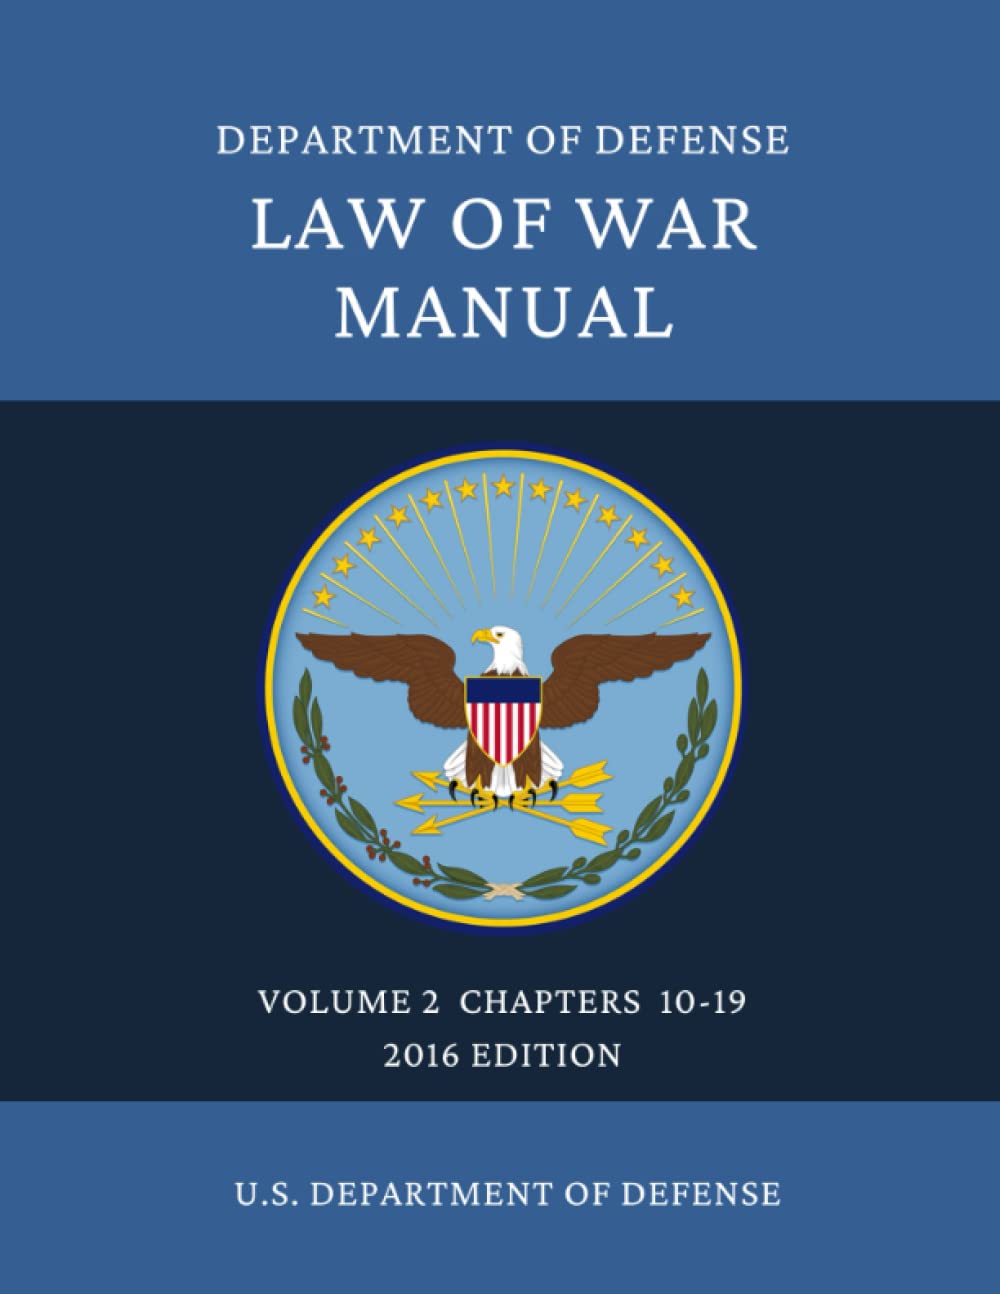 DEPARTMENT OF DEFENSE LAW OF WAR MANUAL: Volume 2 Chapters 10-19 2016 Edition